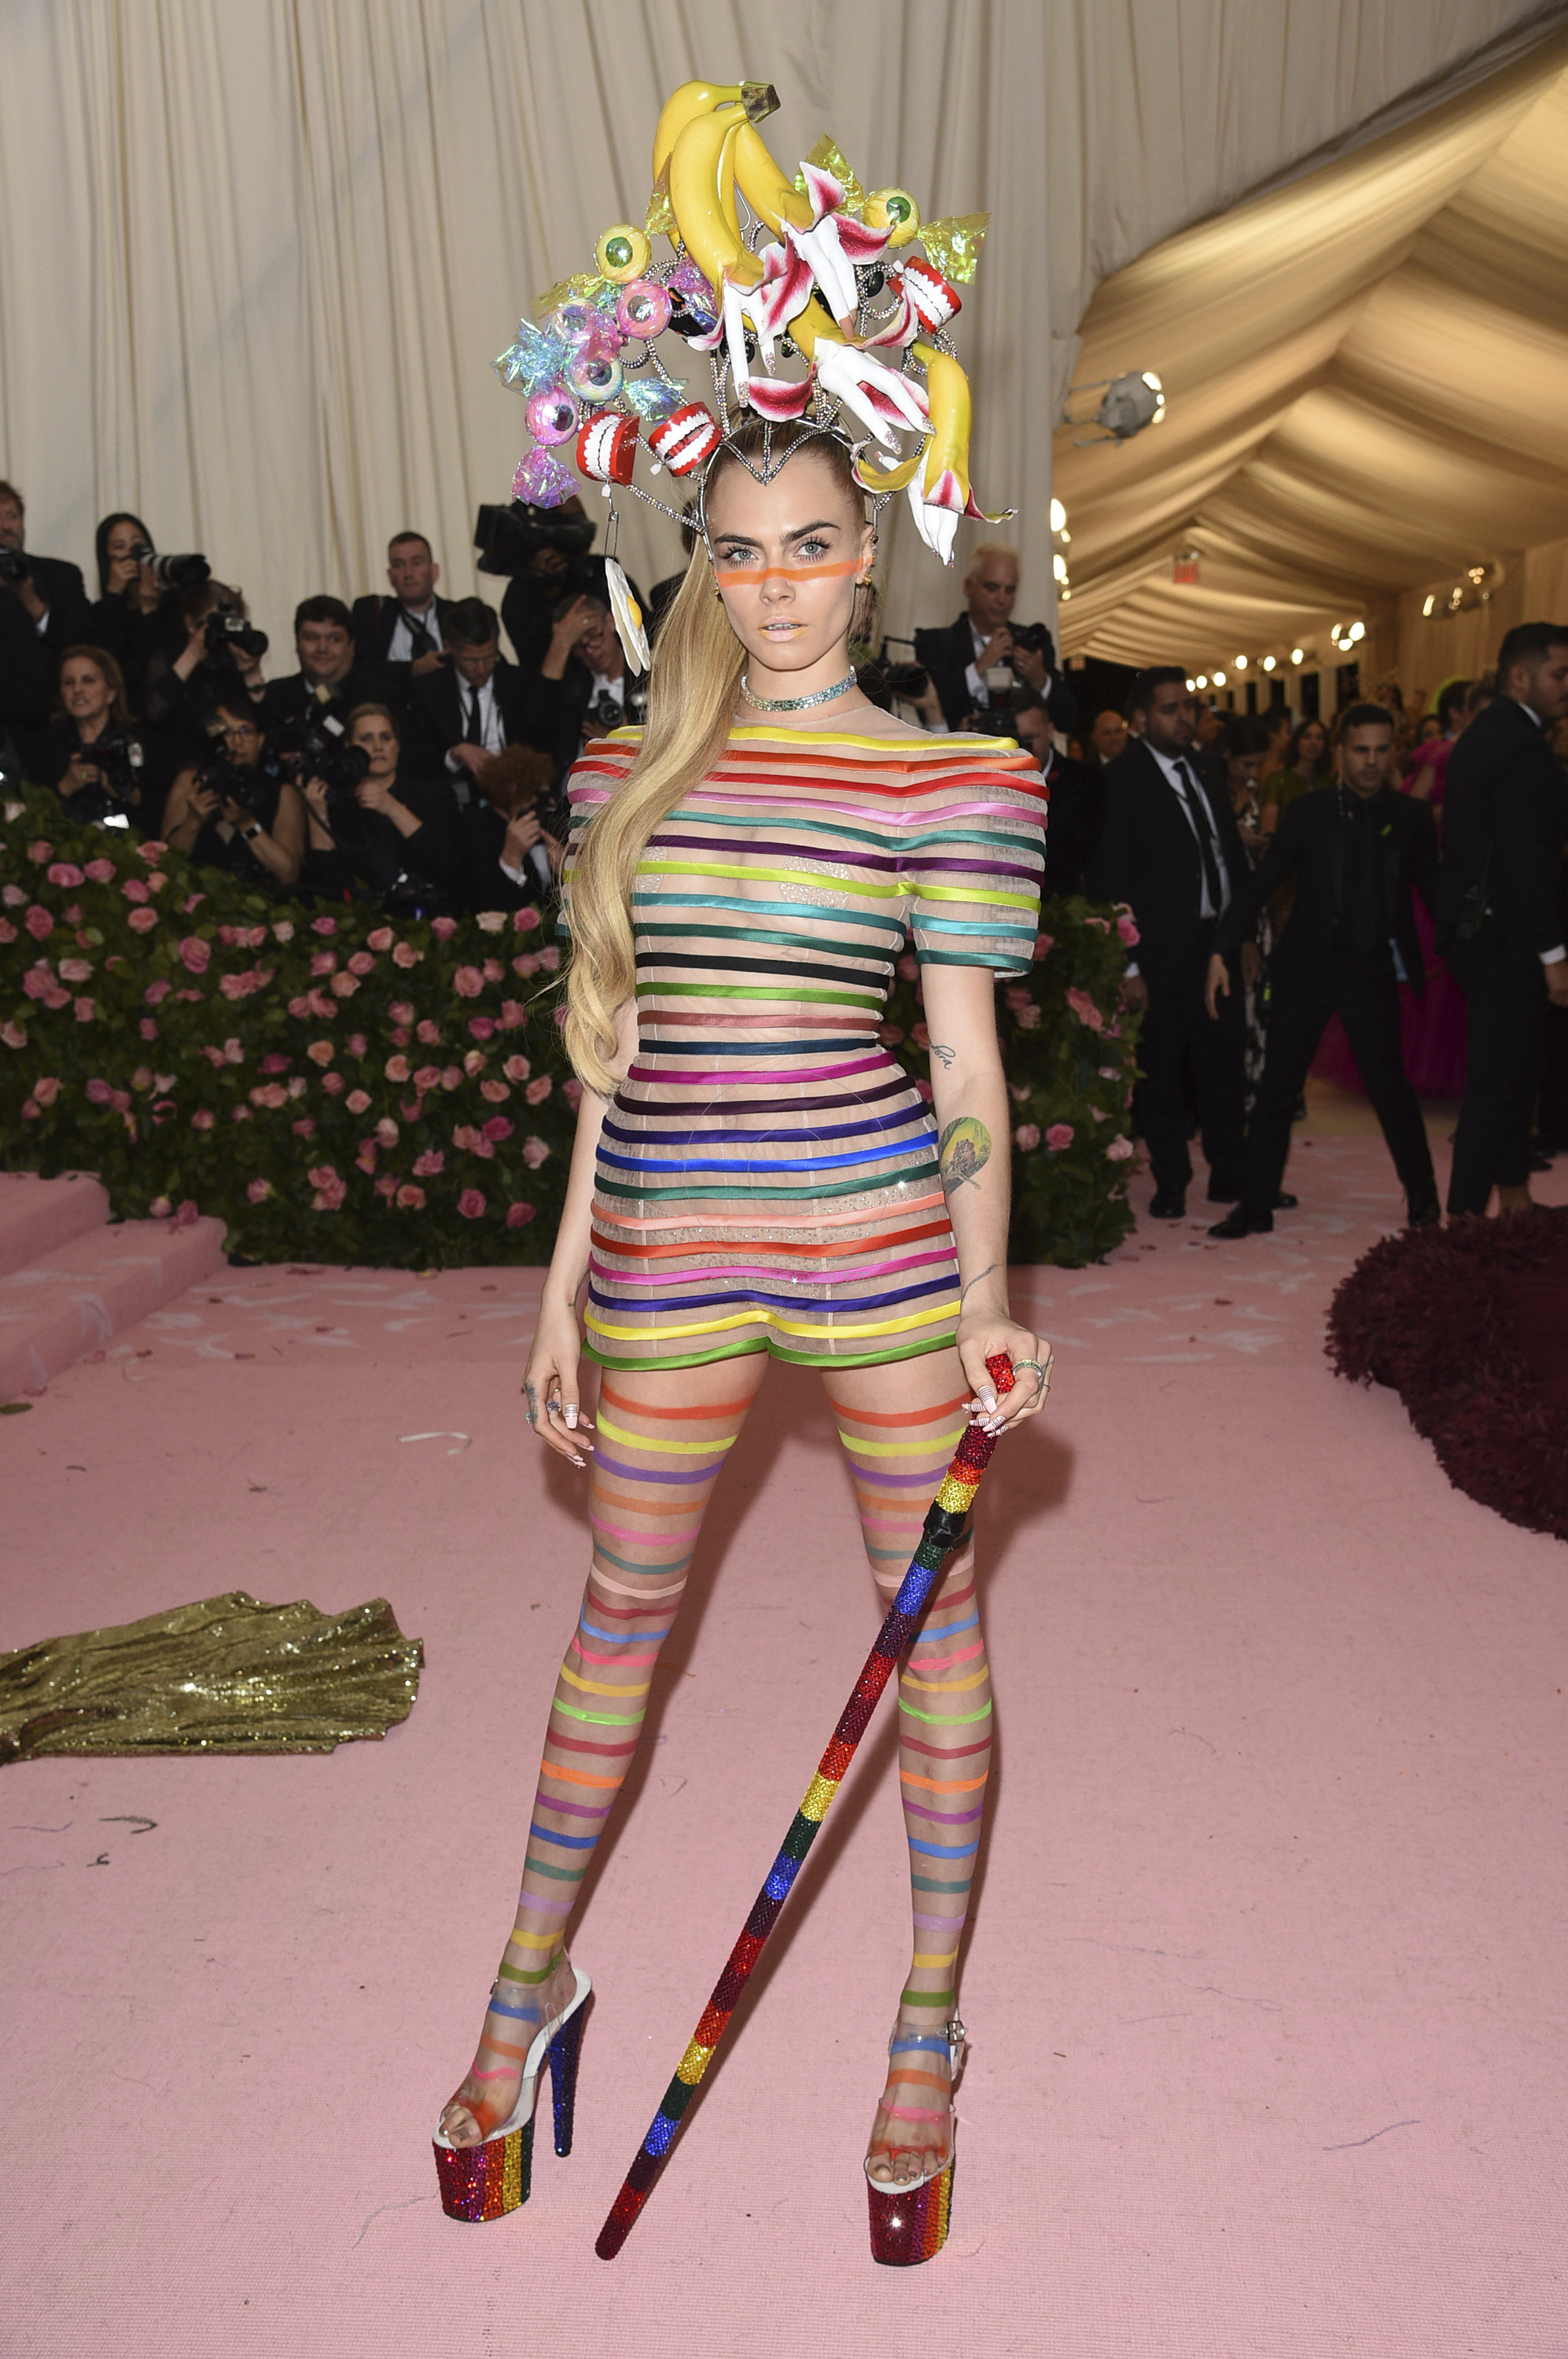 Cara Delevingne attends The Metropolitan Museum of Art's Costume Institute benefit gala celebrating the opening of the "Camp: Notes on Fashion" exhibition on Monday, May 6, 2019, in New York. (Photo by Evan Agostini/Invision/AP)